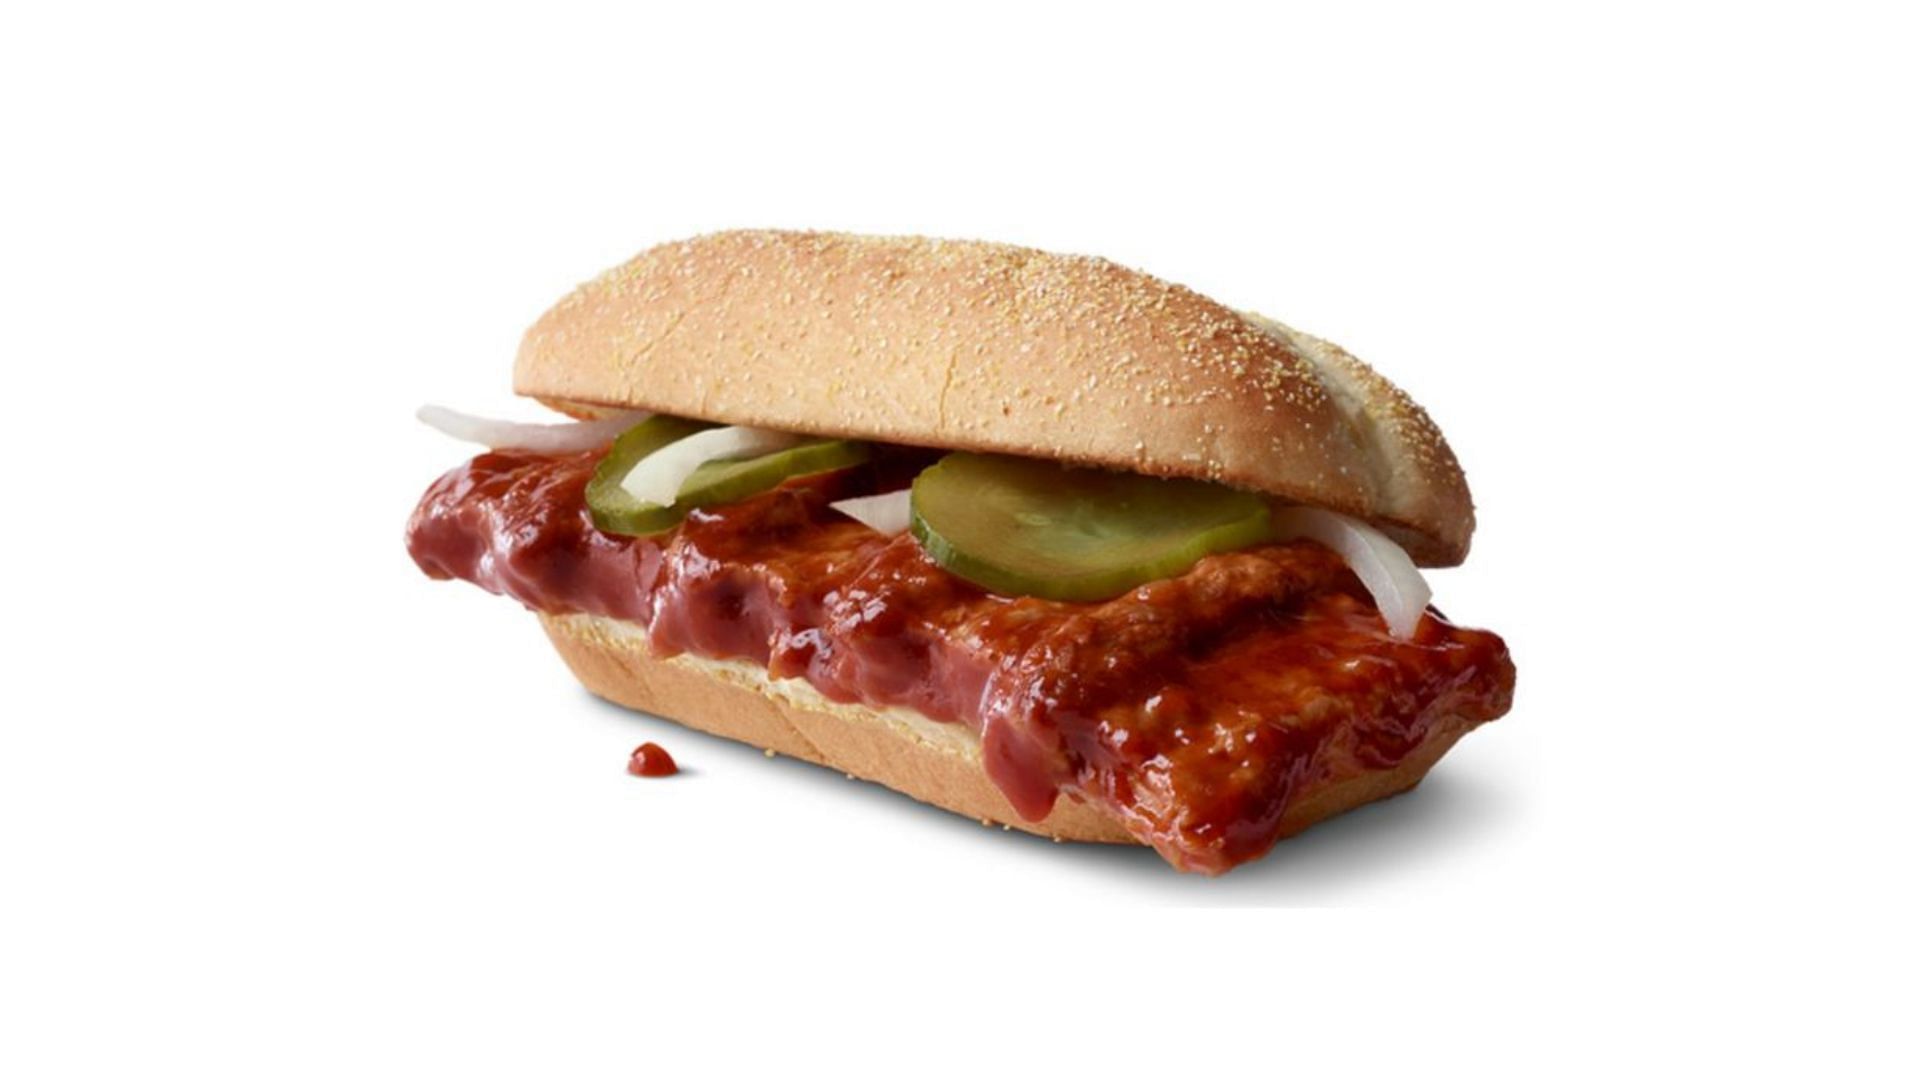 Promotional image of the McRib (Image via McDonald&rsquo;s)